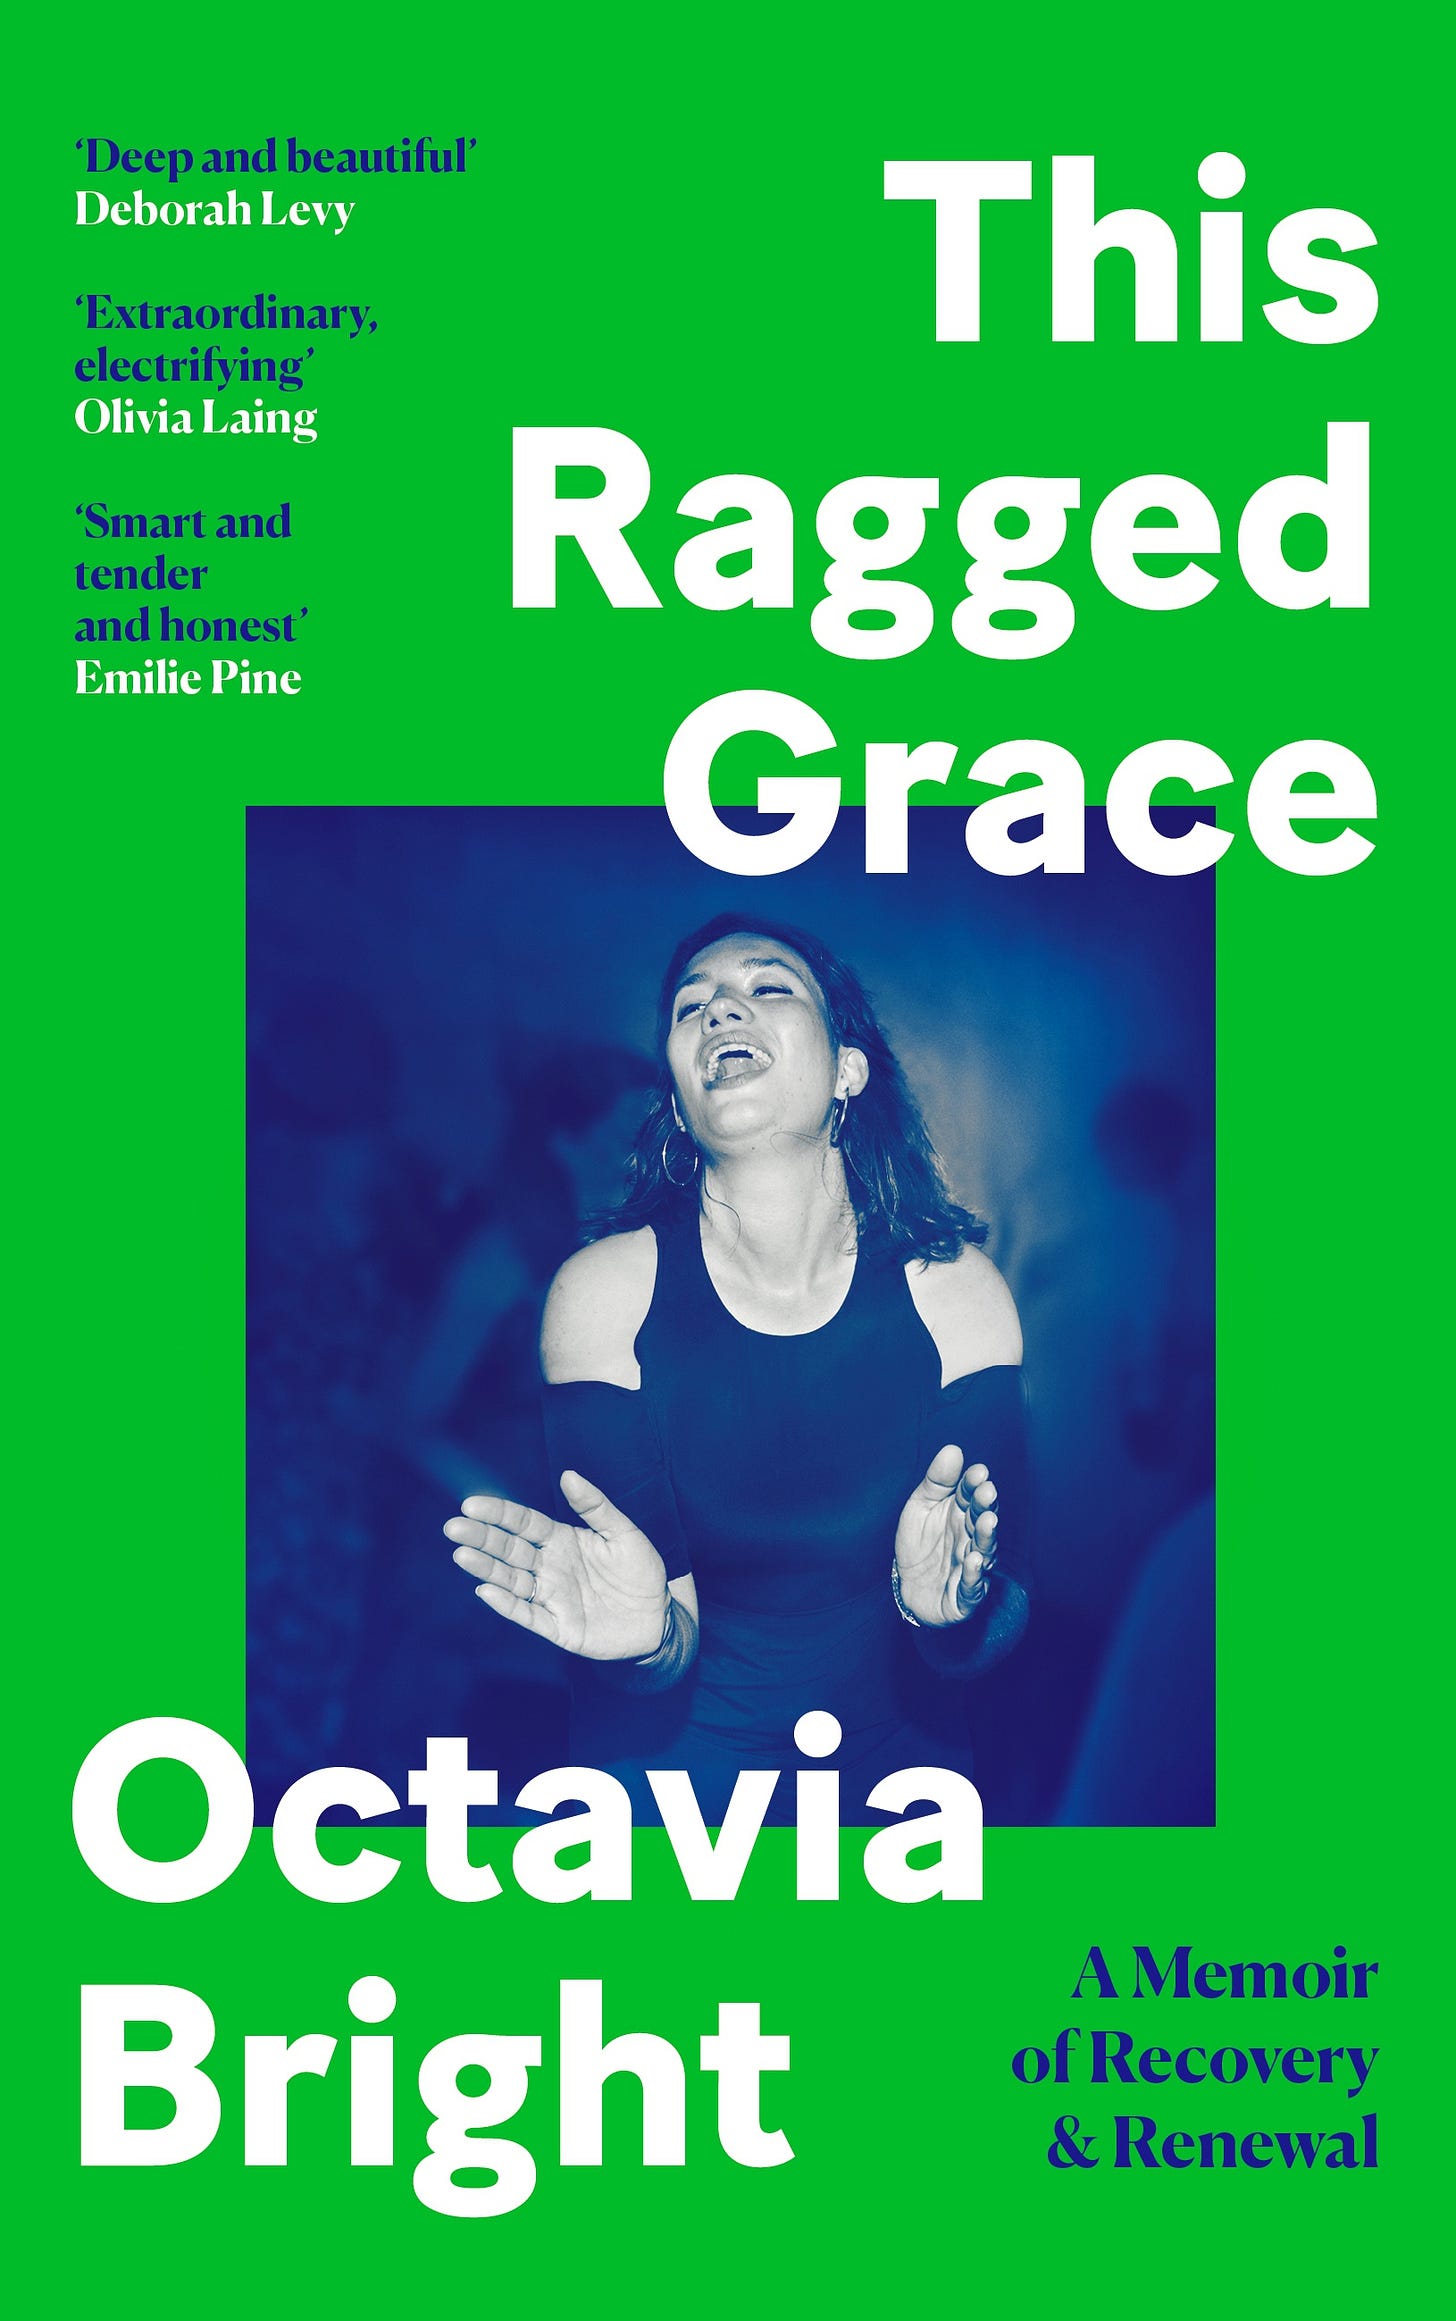 The cover of Octavia Bright's book This Ragged Grace